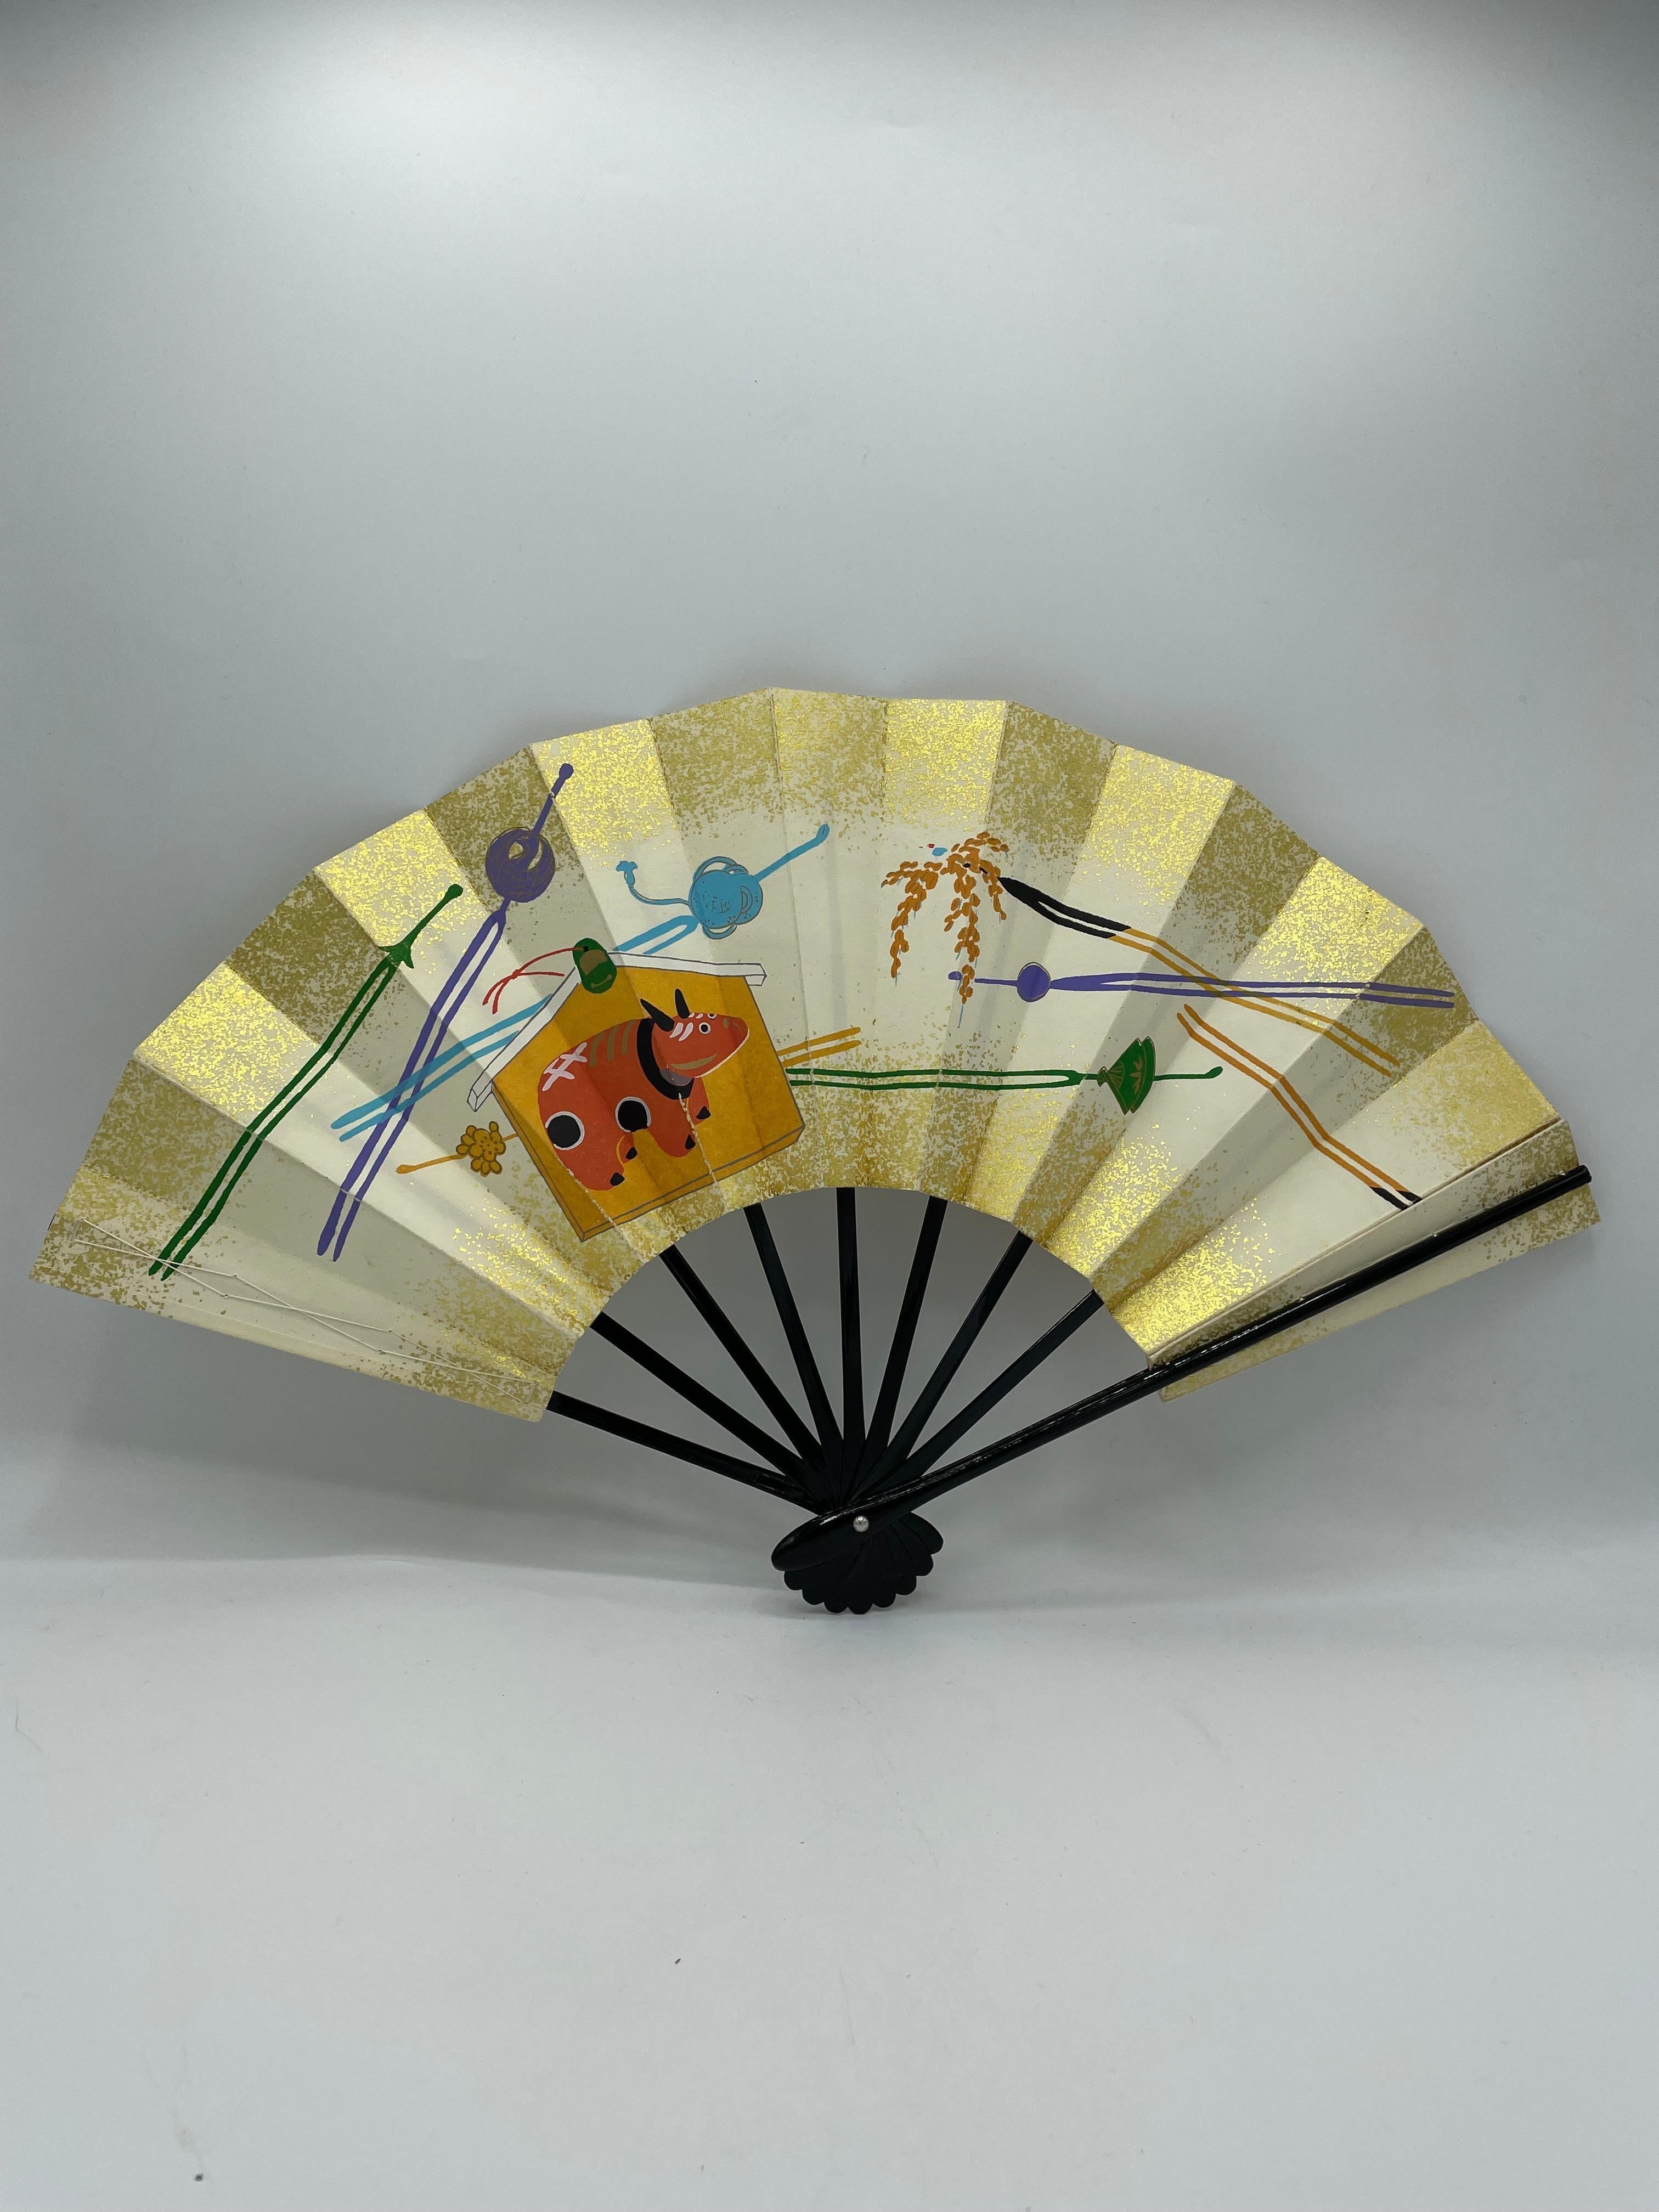 This is a fan which was made in Japan around 1980s in Showa era. 
This material is Paper and wood and there are little threads with cotton on the side. 
Both sides are same designs of Akabeko and Kanzashi.

Japanese fans are made of paper on a